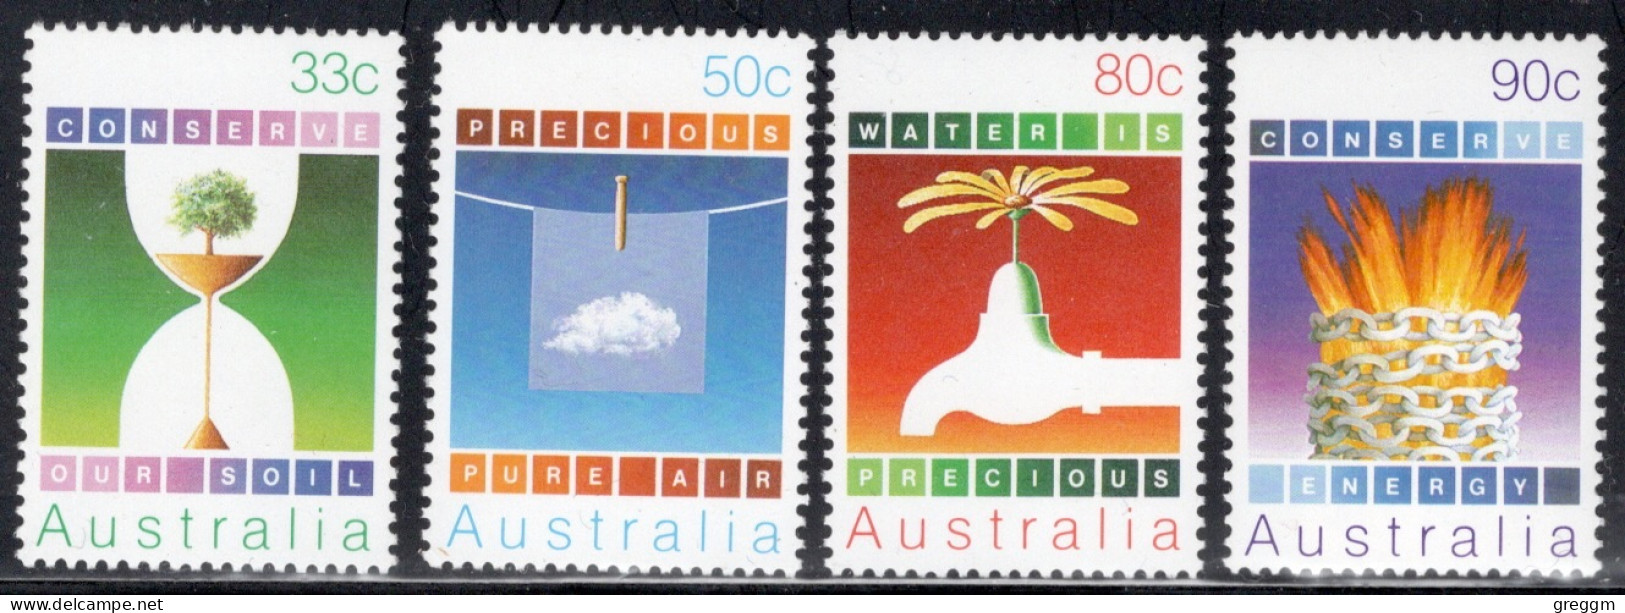 Australia 1985 Set Of Stamps To Celebrate Environment Protection In Unmounted Mint - Mint Stamps